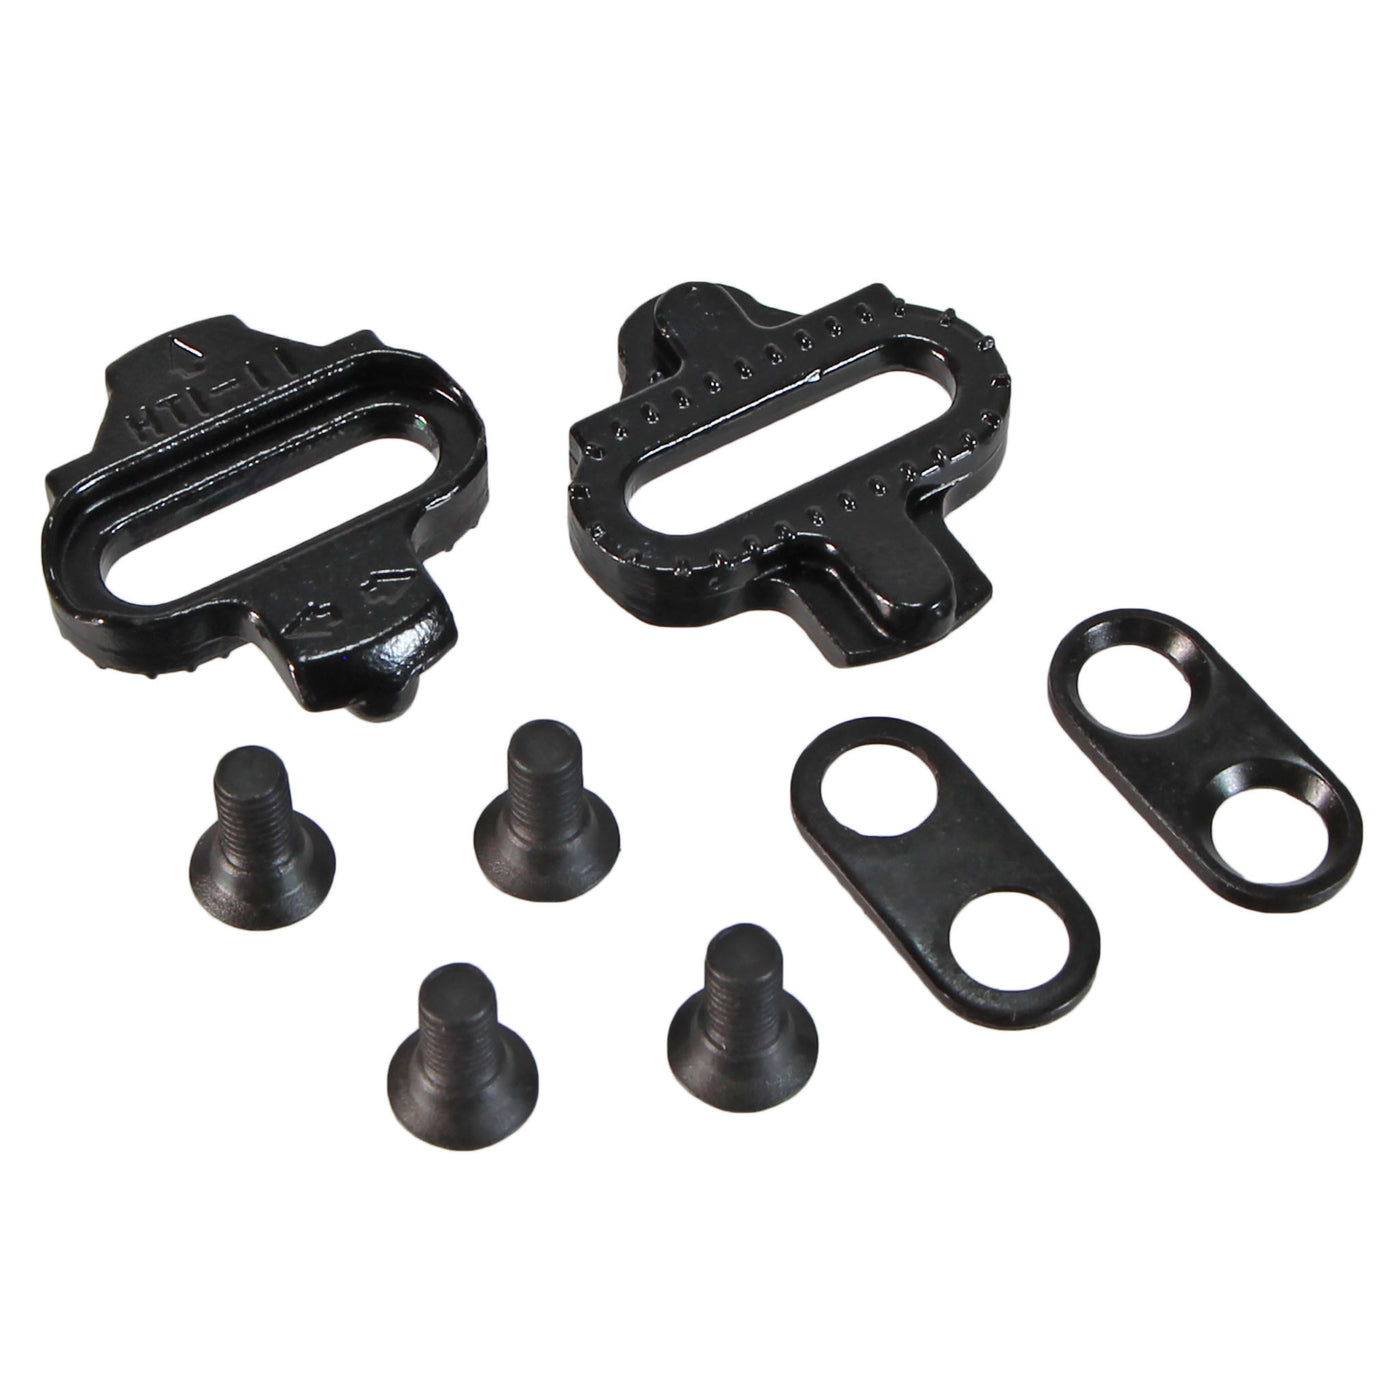 HT H11 Cleats for Shimano SPD Style Pedals, 4.5 Degree Float w/ Mounting Hardware